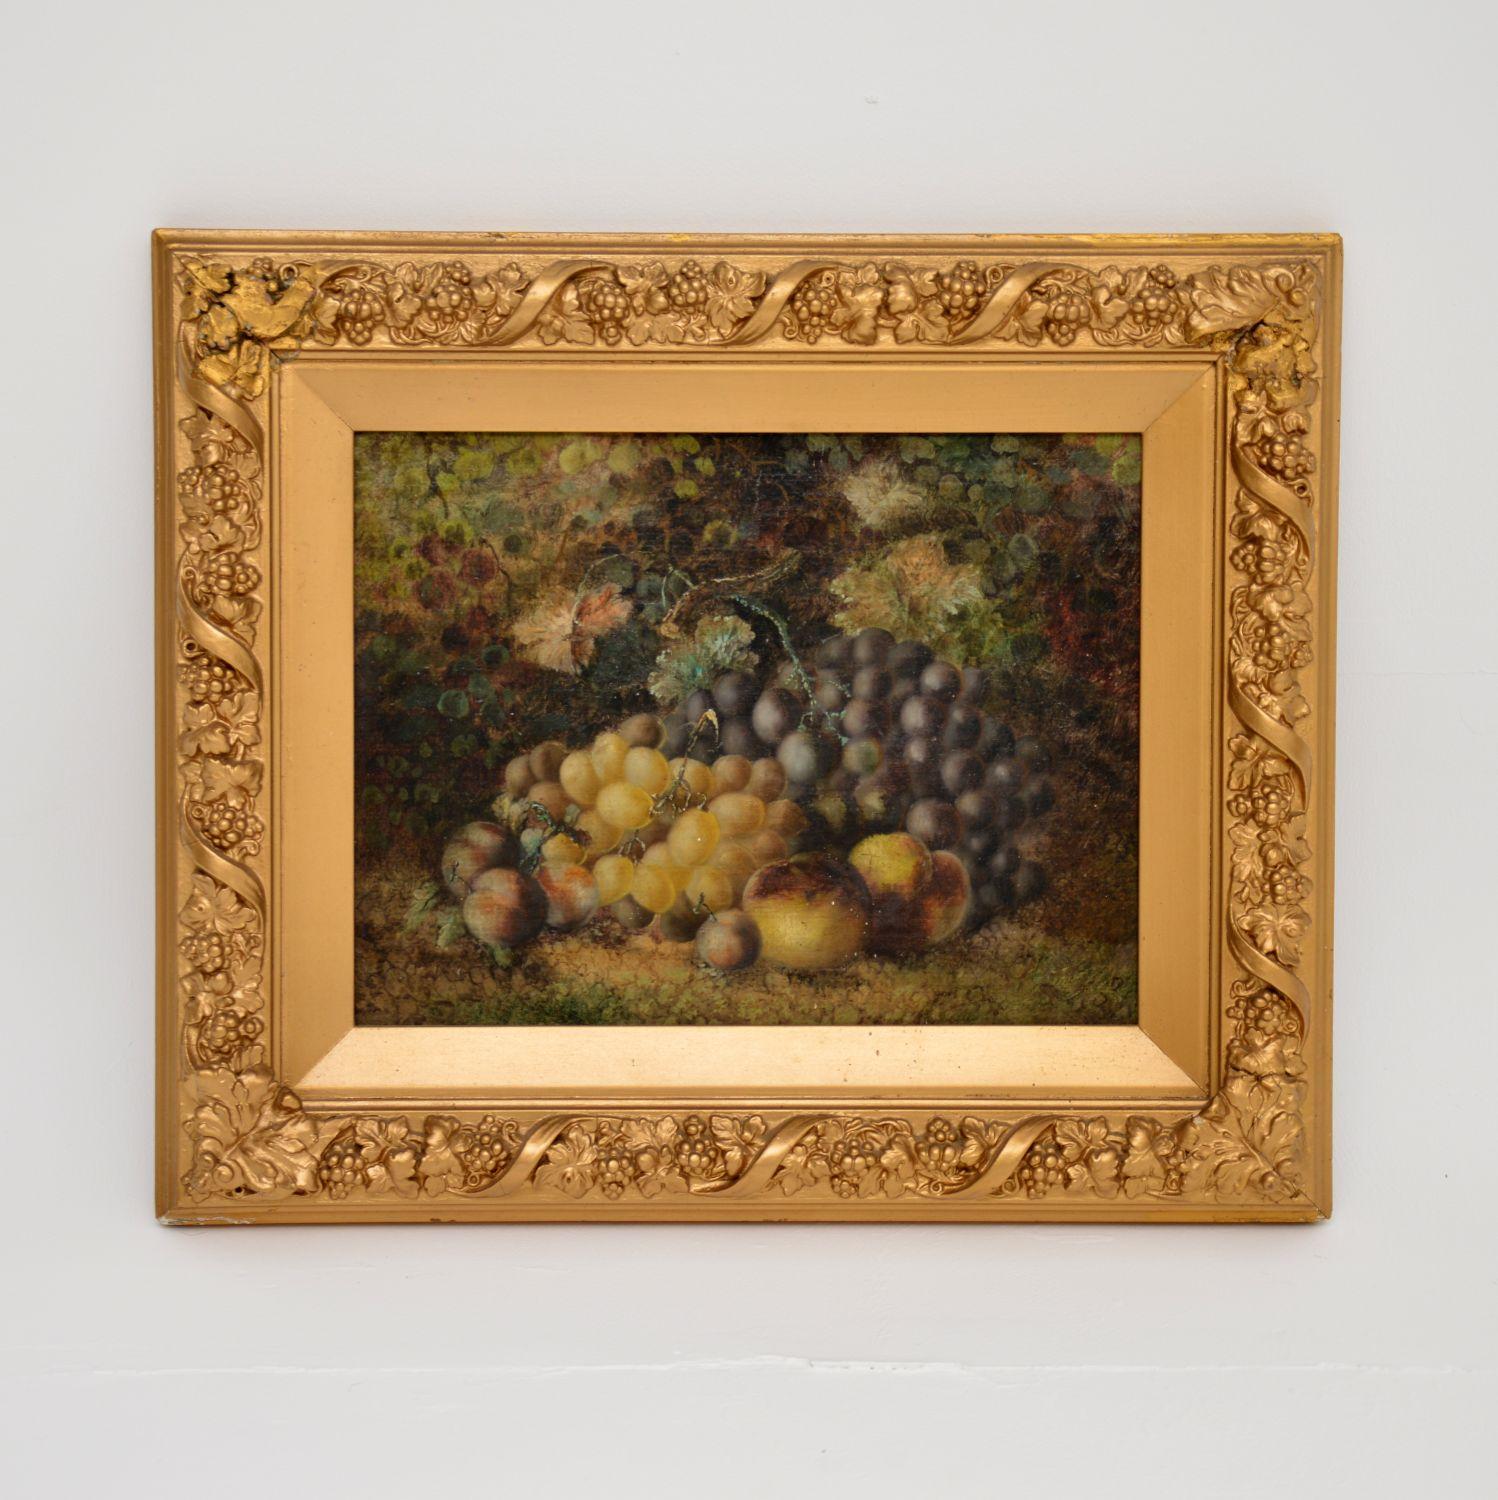 An absolutely beautiful antique still life oil painting depicting fruits on a table. I would say this is at least 19th century Victorian, possibly earlier.

It is wonderfully executed, with stunning colour and details. It is in very good condition